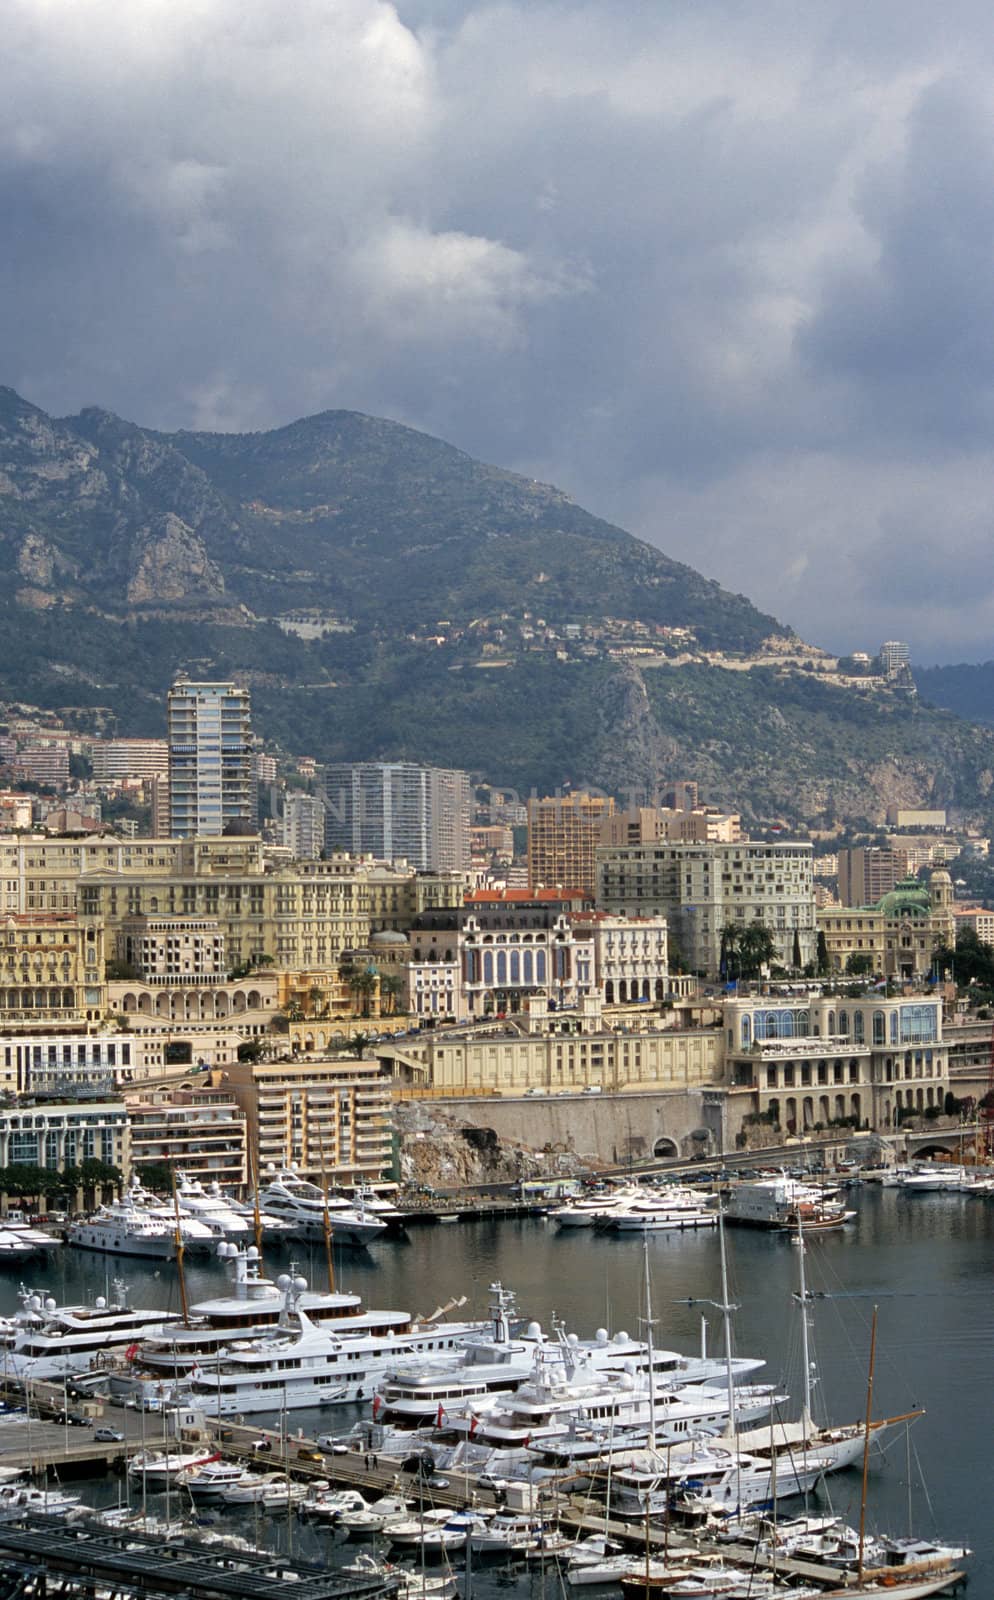 Luxury yachts dock in Monaco, home of the Monaco Grand Prix and the Monte Carlo Casino visible in the background.